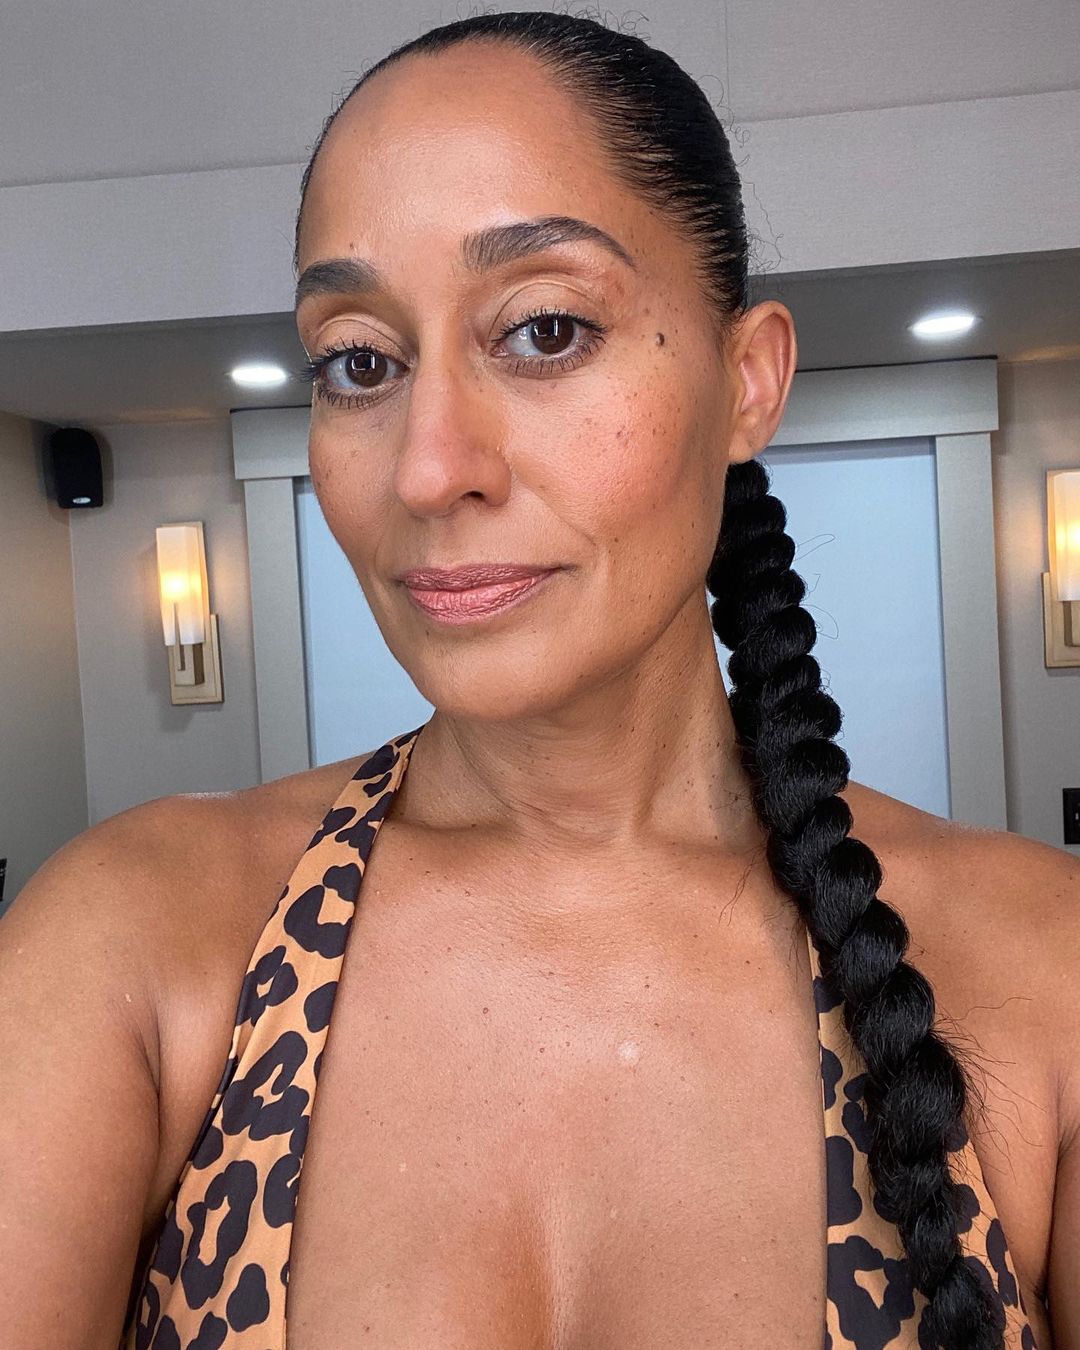 Tracee Ellis Ross Thirst Trapping Now and Then! - Photo 1